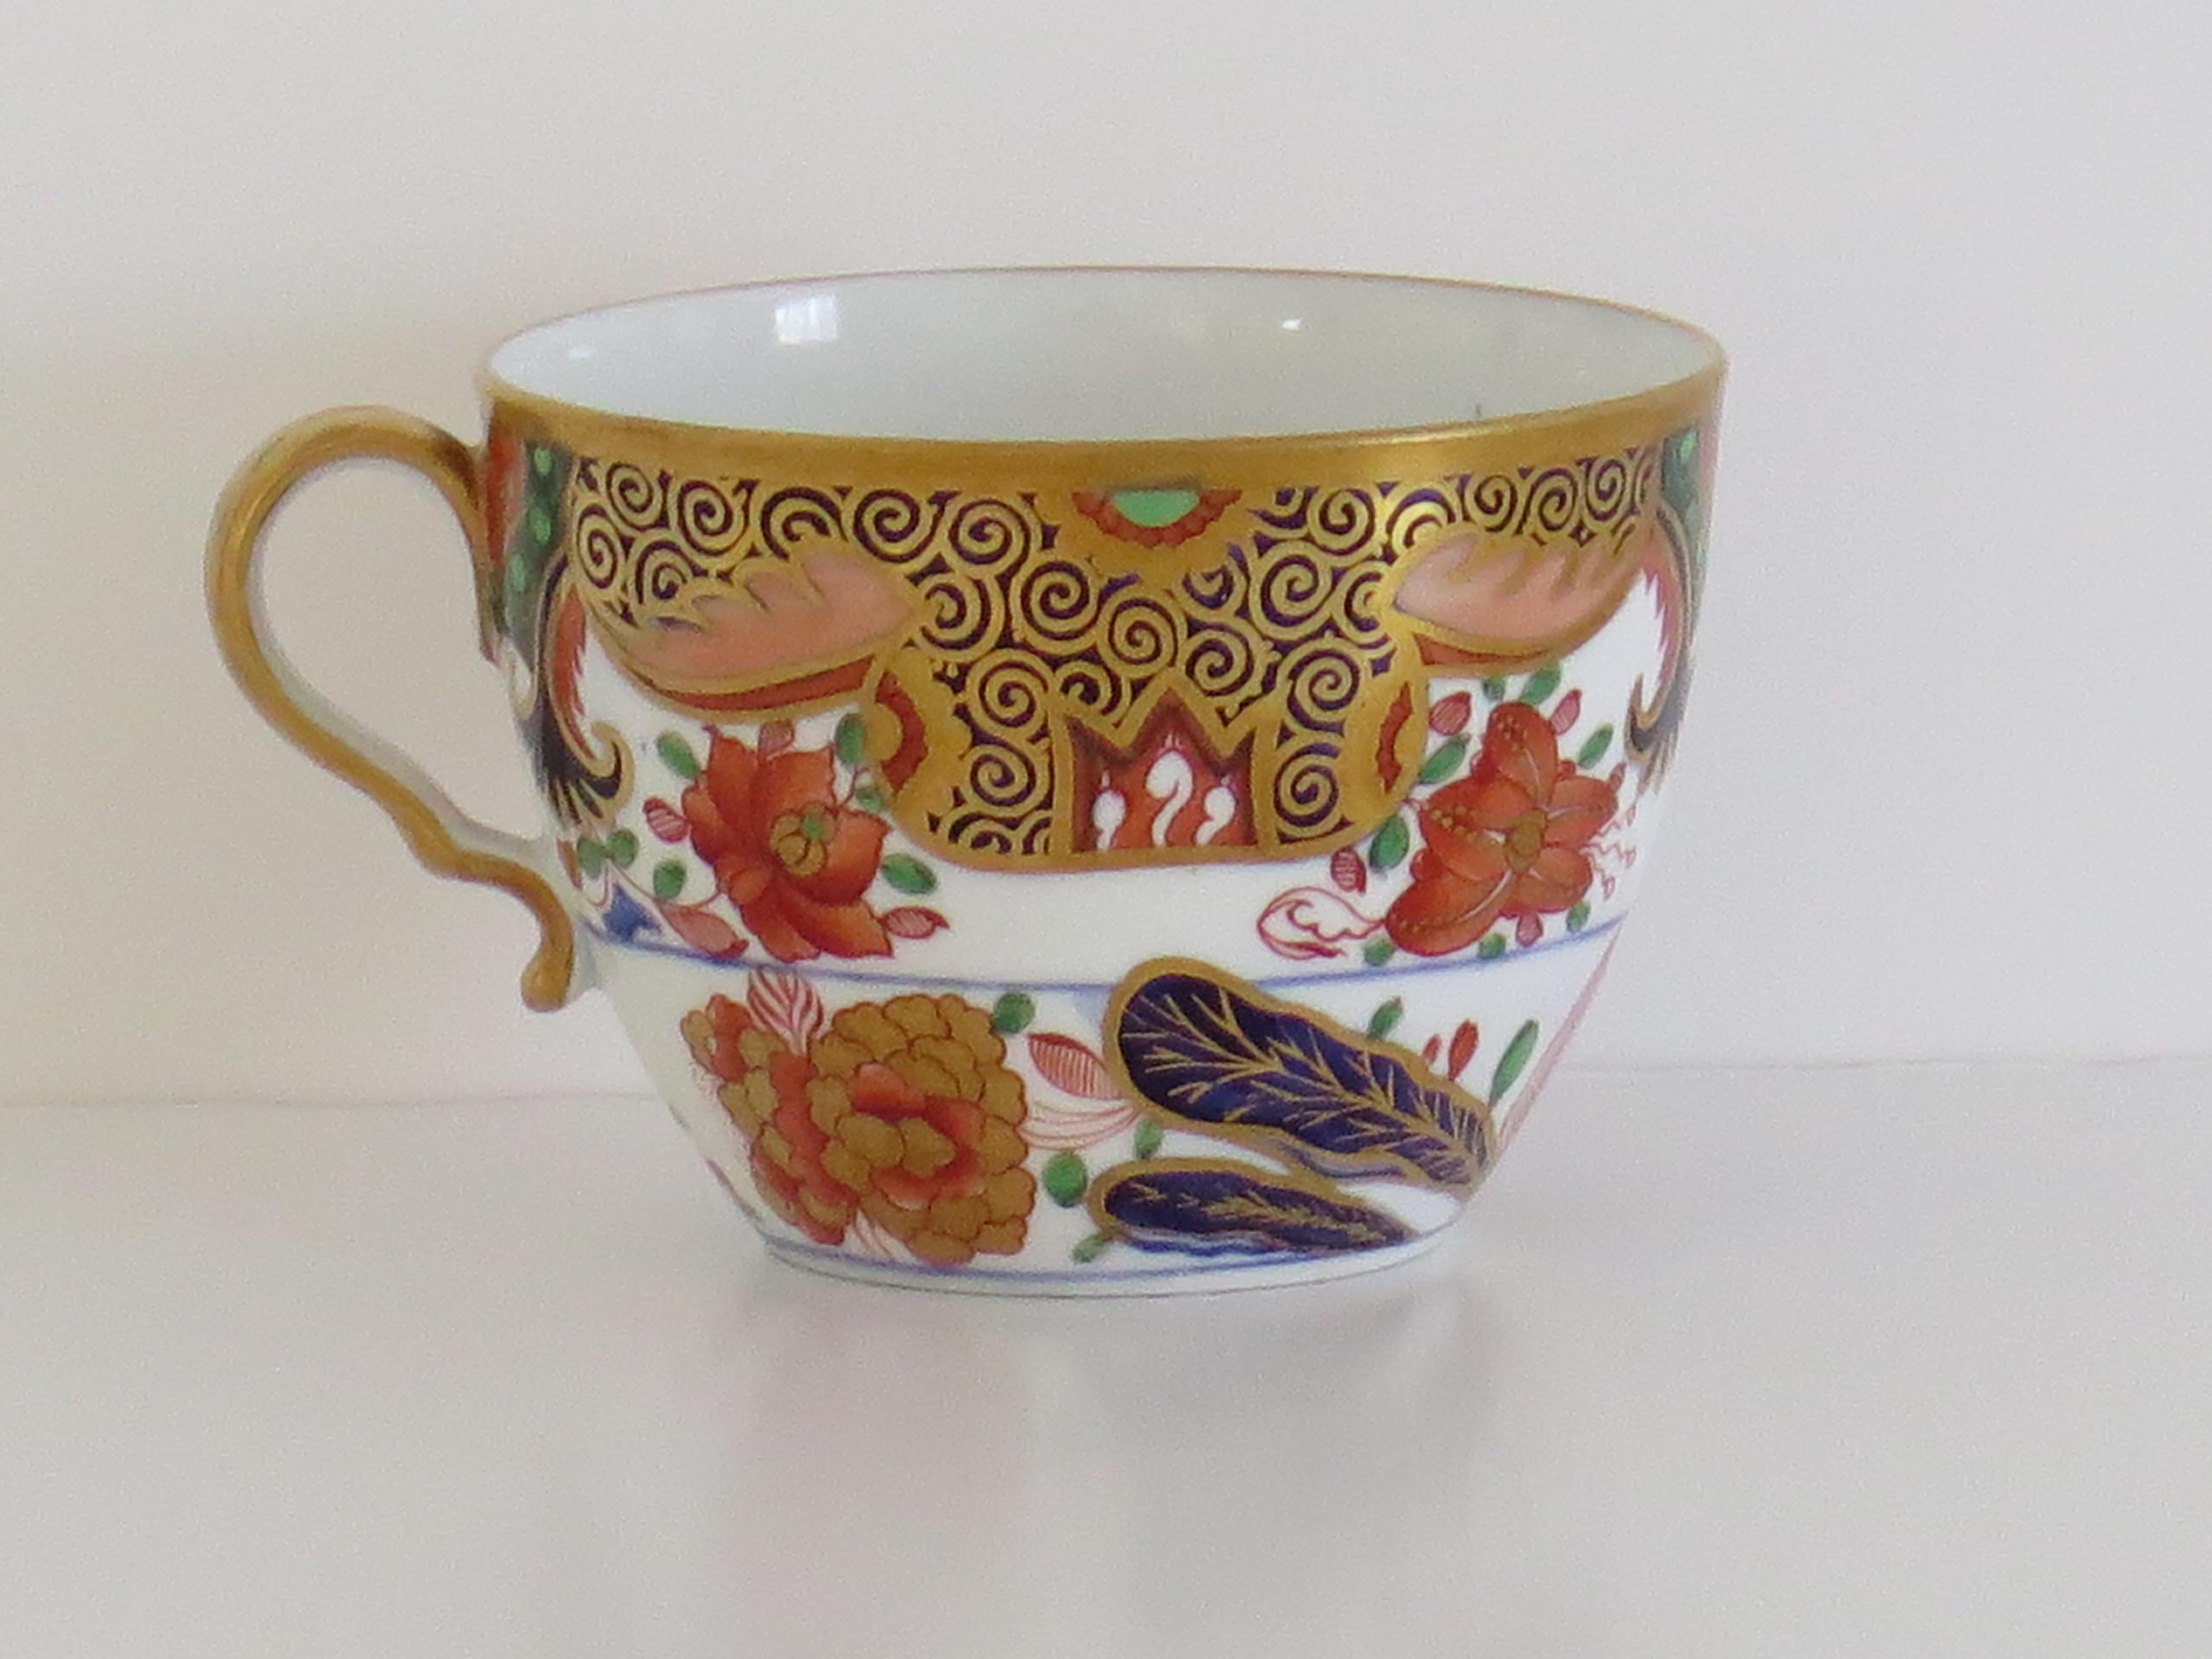 Spode Porcelain Tea Cup in Hand Painted & Gilded Pattern 967, circa 1810 In Good Condition For Sale In Lincoln, Lincolnshire